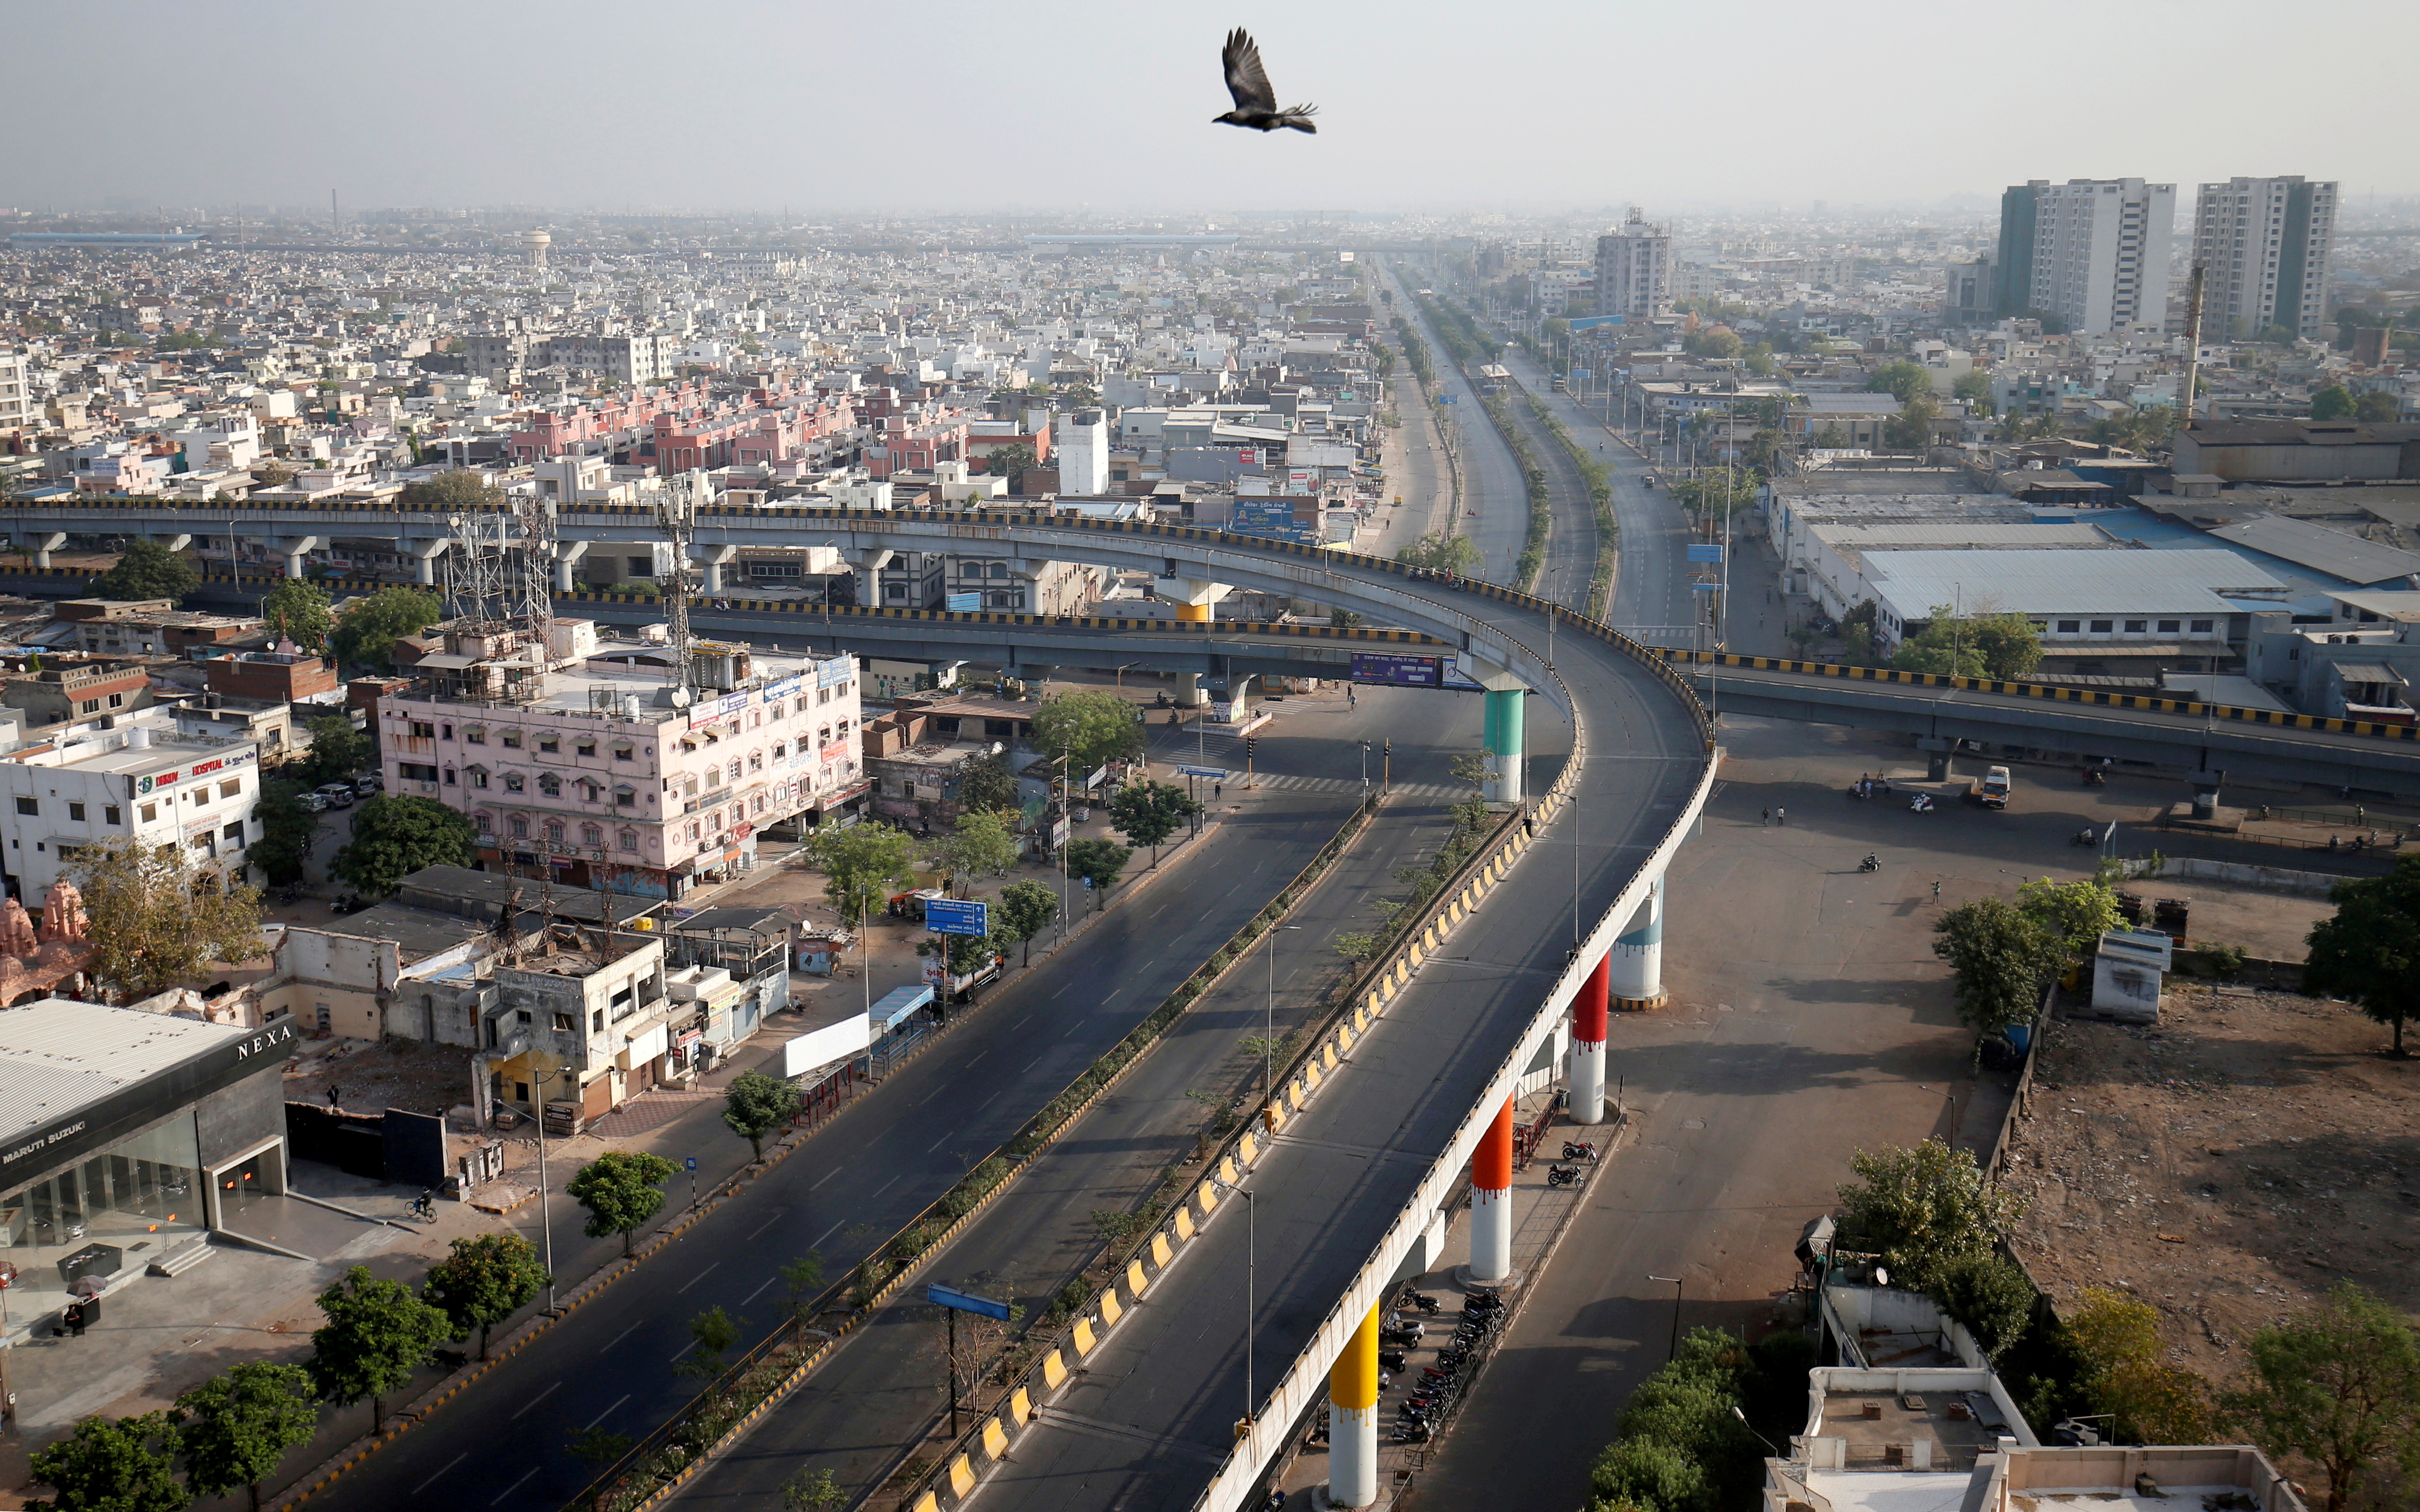 A view shows empty roads during a 14-hour long curfew to limit the spreading of coronavirus disease (COVID-19) in the country, in Ahmedabad, India, March 22, 2020. REUTERS/Amit Dave/File Photo